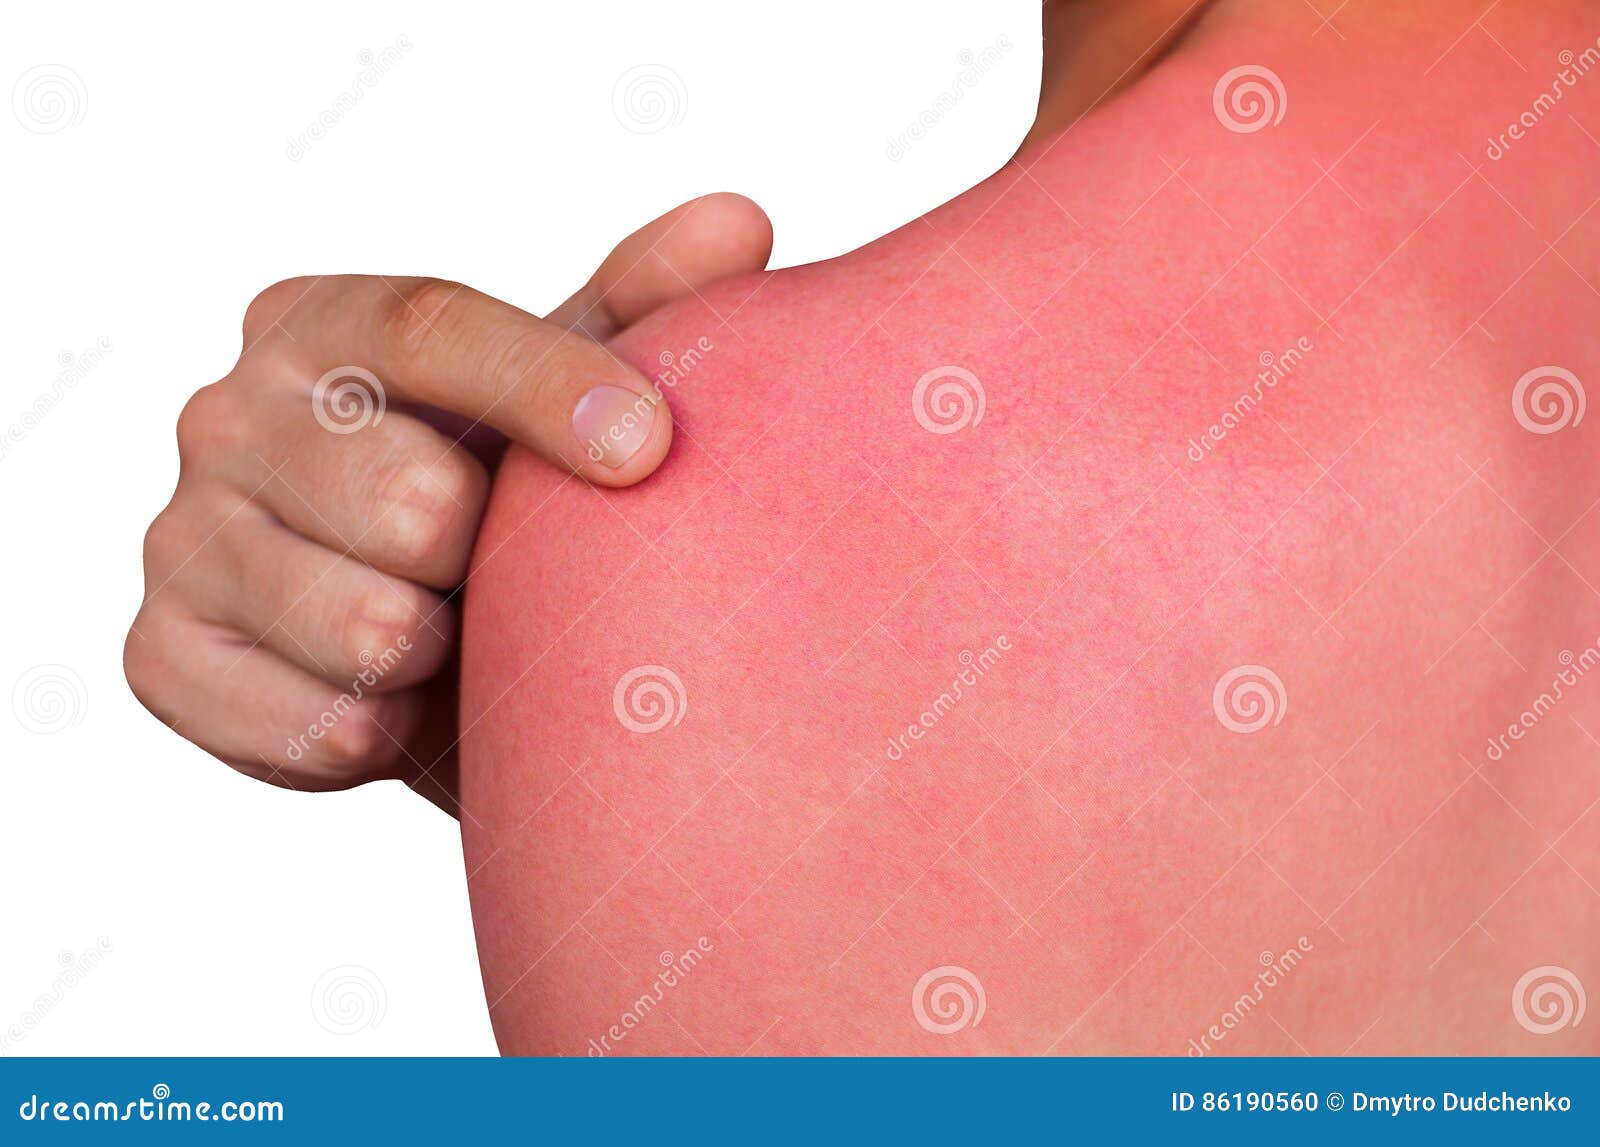 a man with reddened, itchy skin after sunburn.